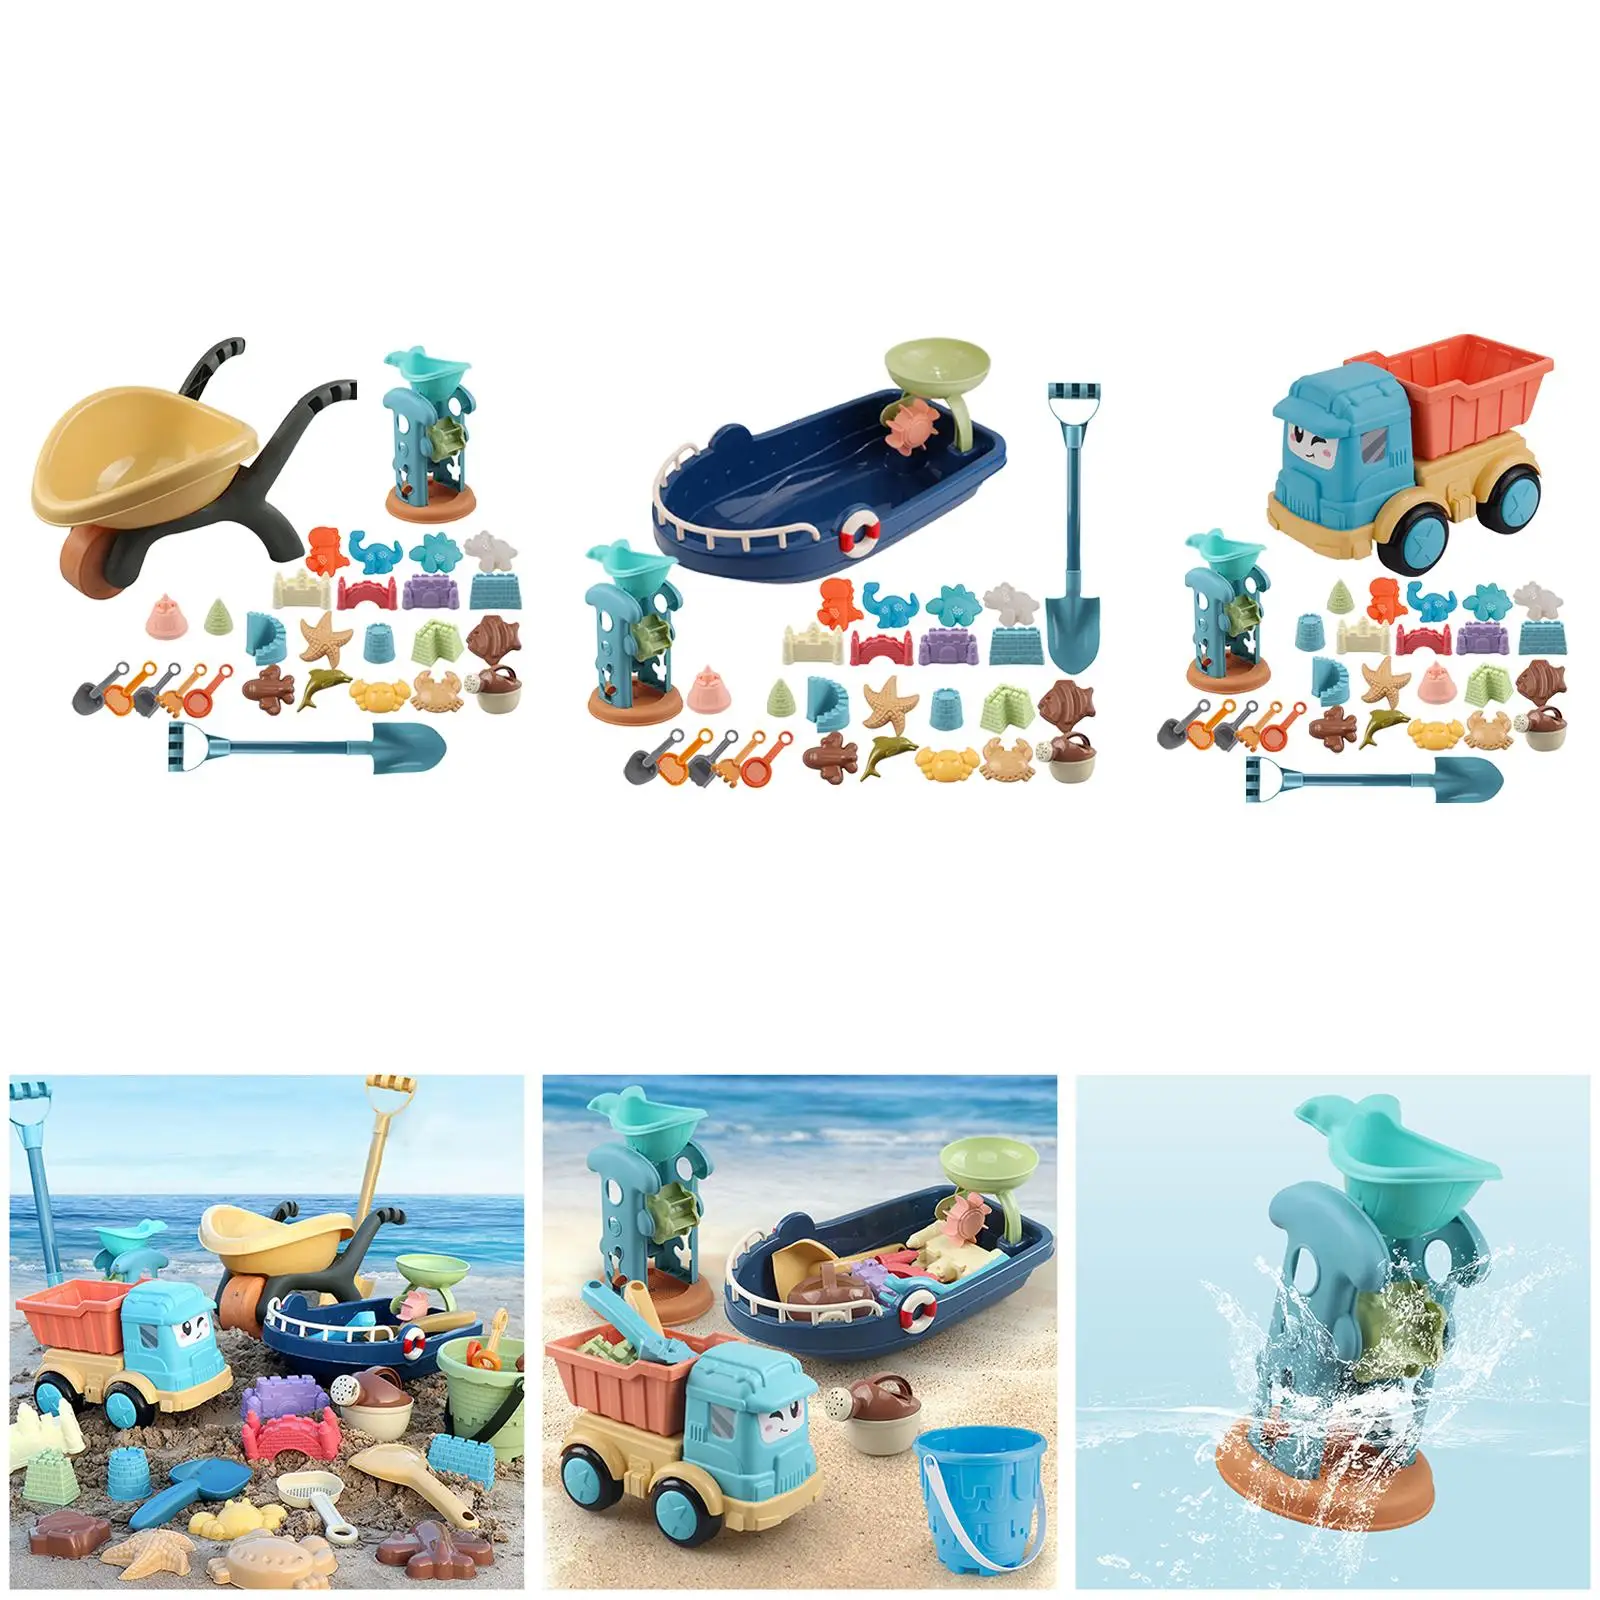 28 Beach Fun for Games Activity Baby Toddler Birthday Gifts 